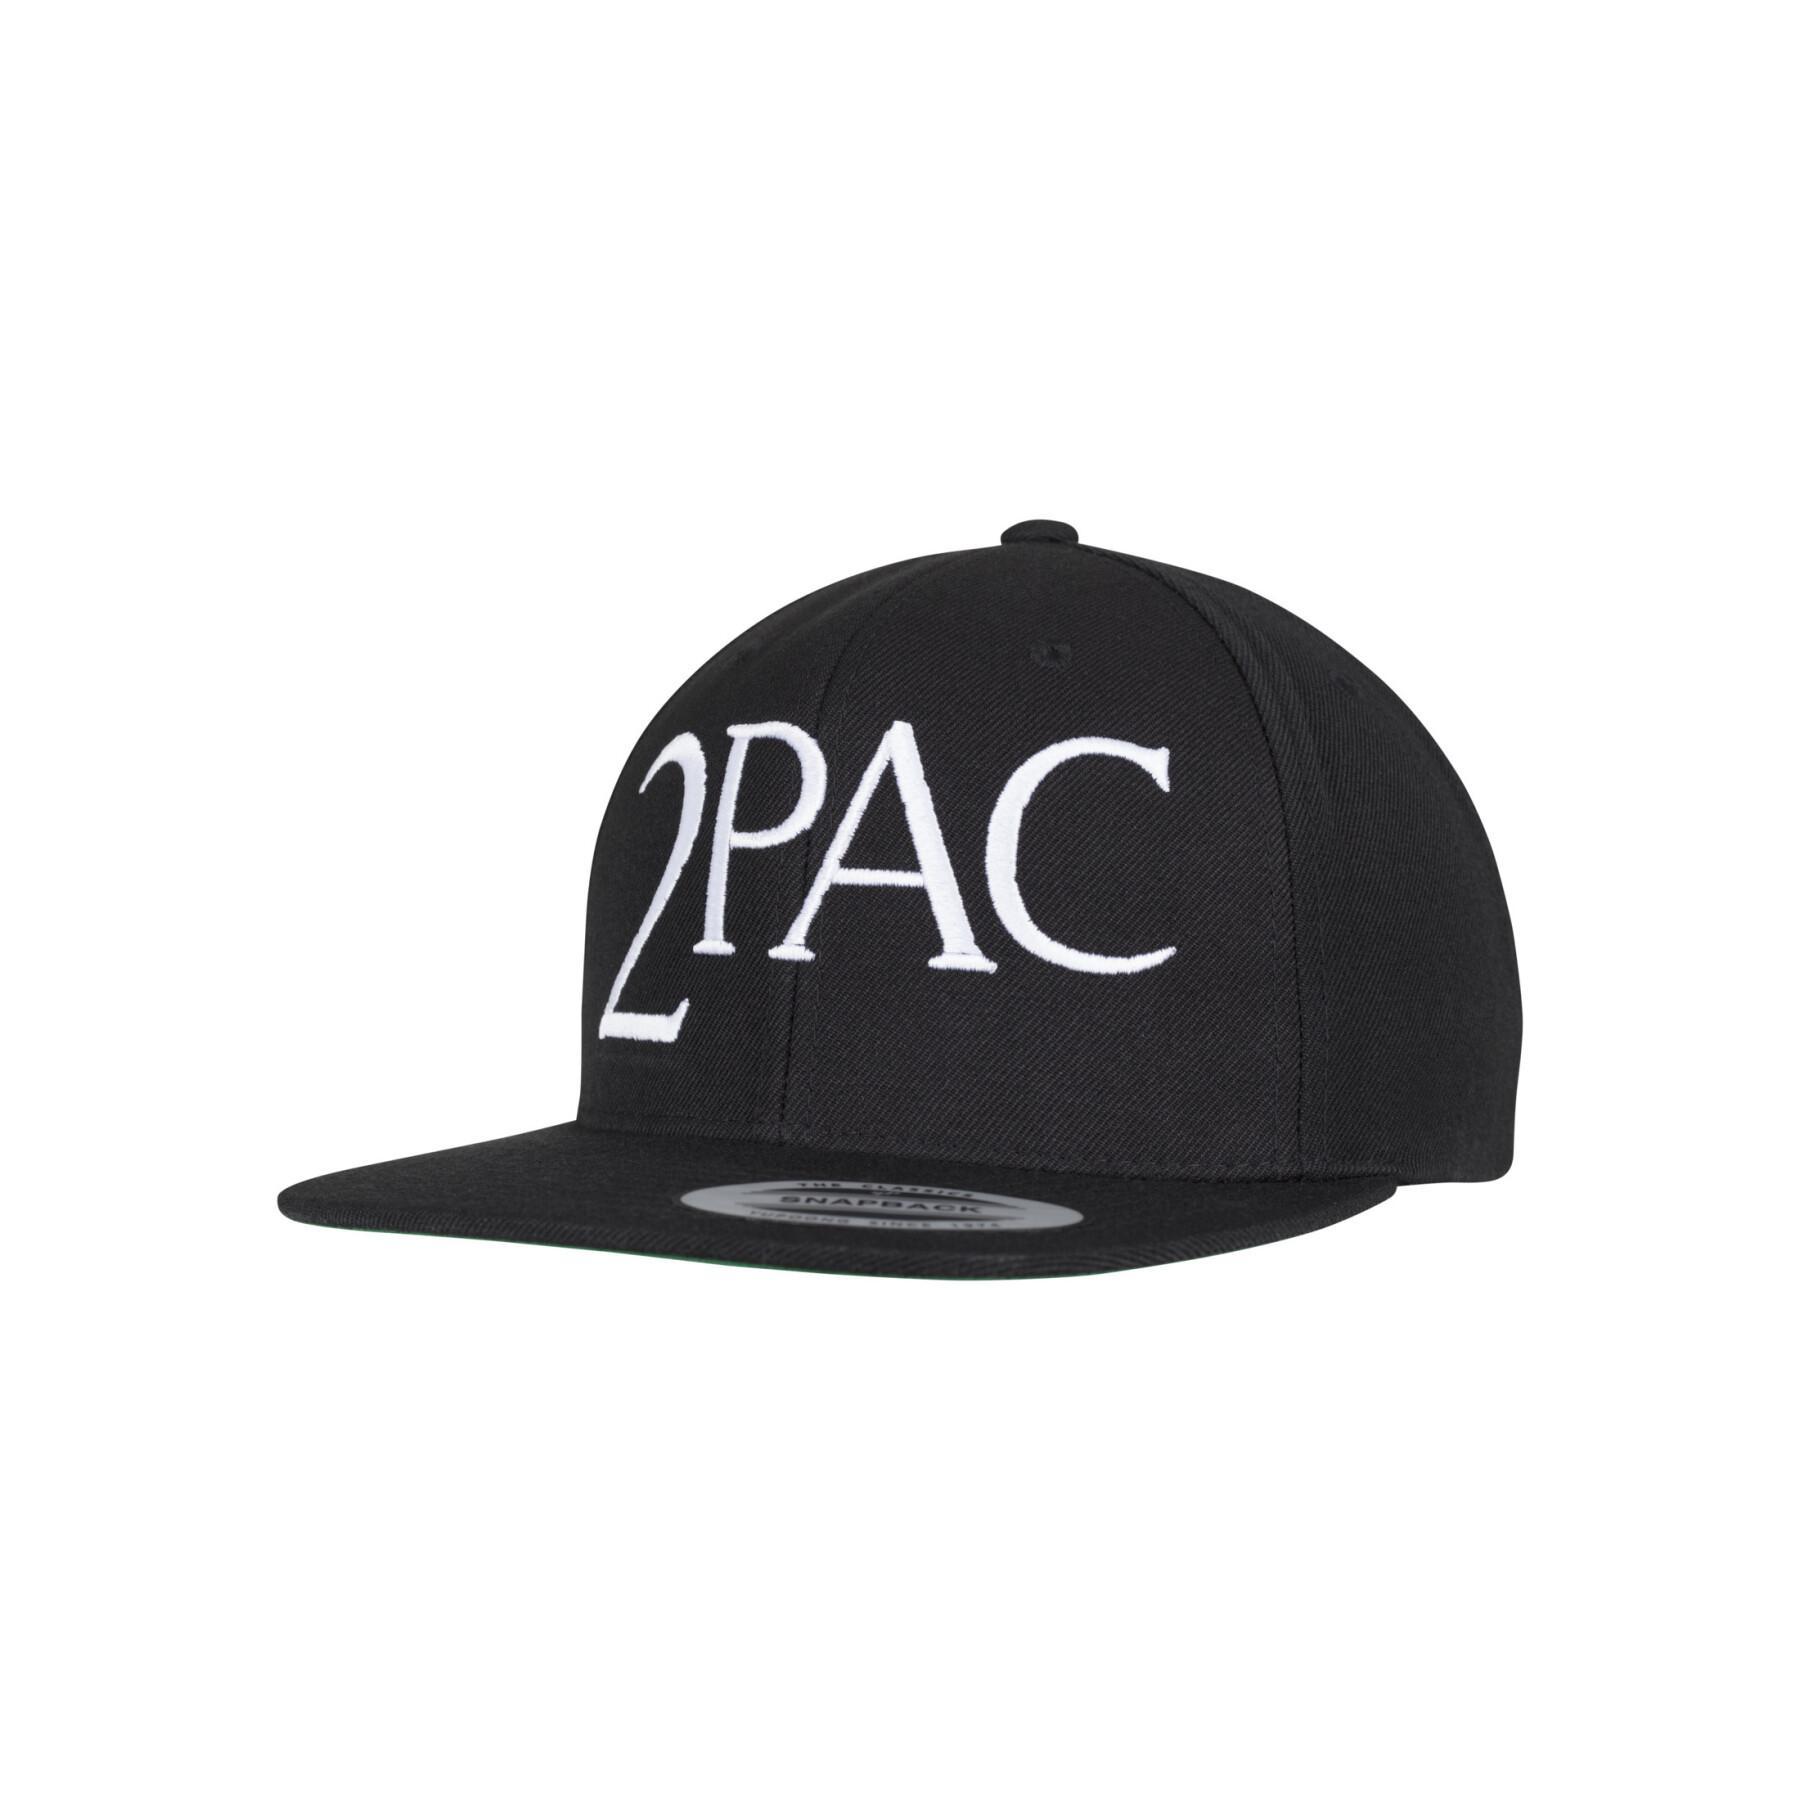 Casquette Mister Tee 2pac